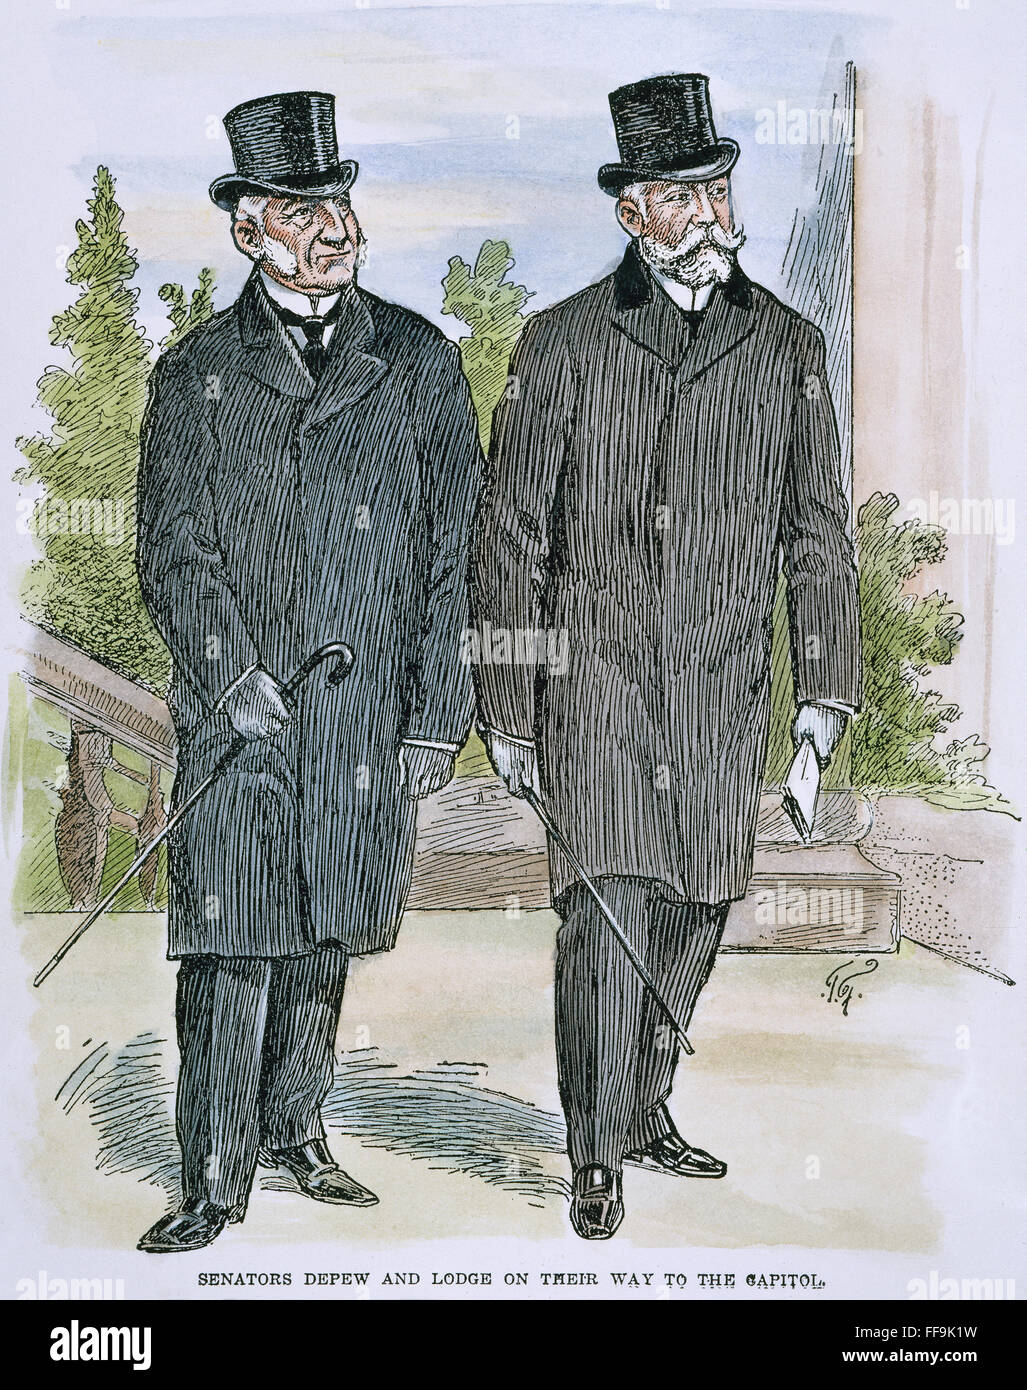 DEPEW AND LODGE. /nSenators Chauncey Mitchell Depew (1834-1928) and Henry Cabot Lodge (1850-1924) on their way to the Capitol in Washington, D.C. Drawing, 1902, by Thomas Fleming. Stock Photo